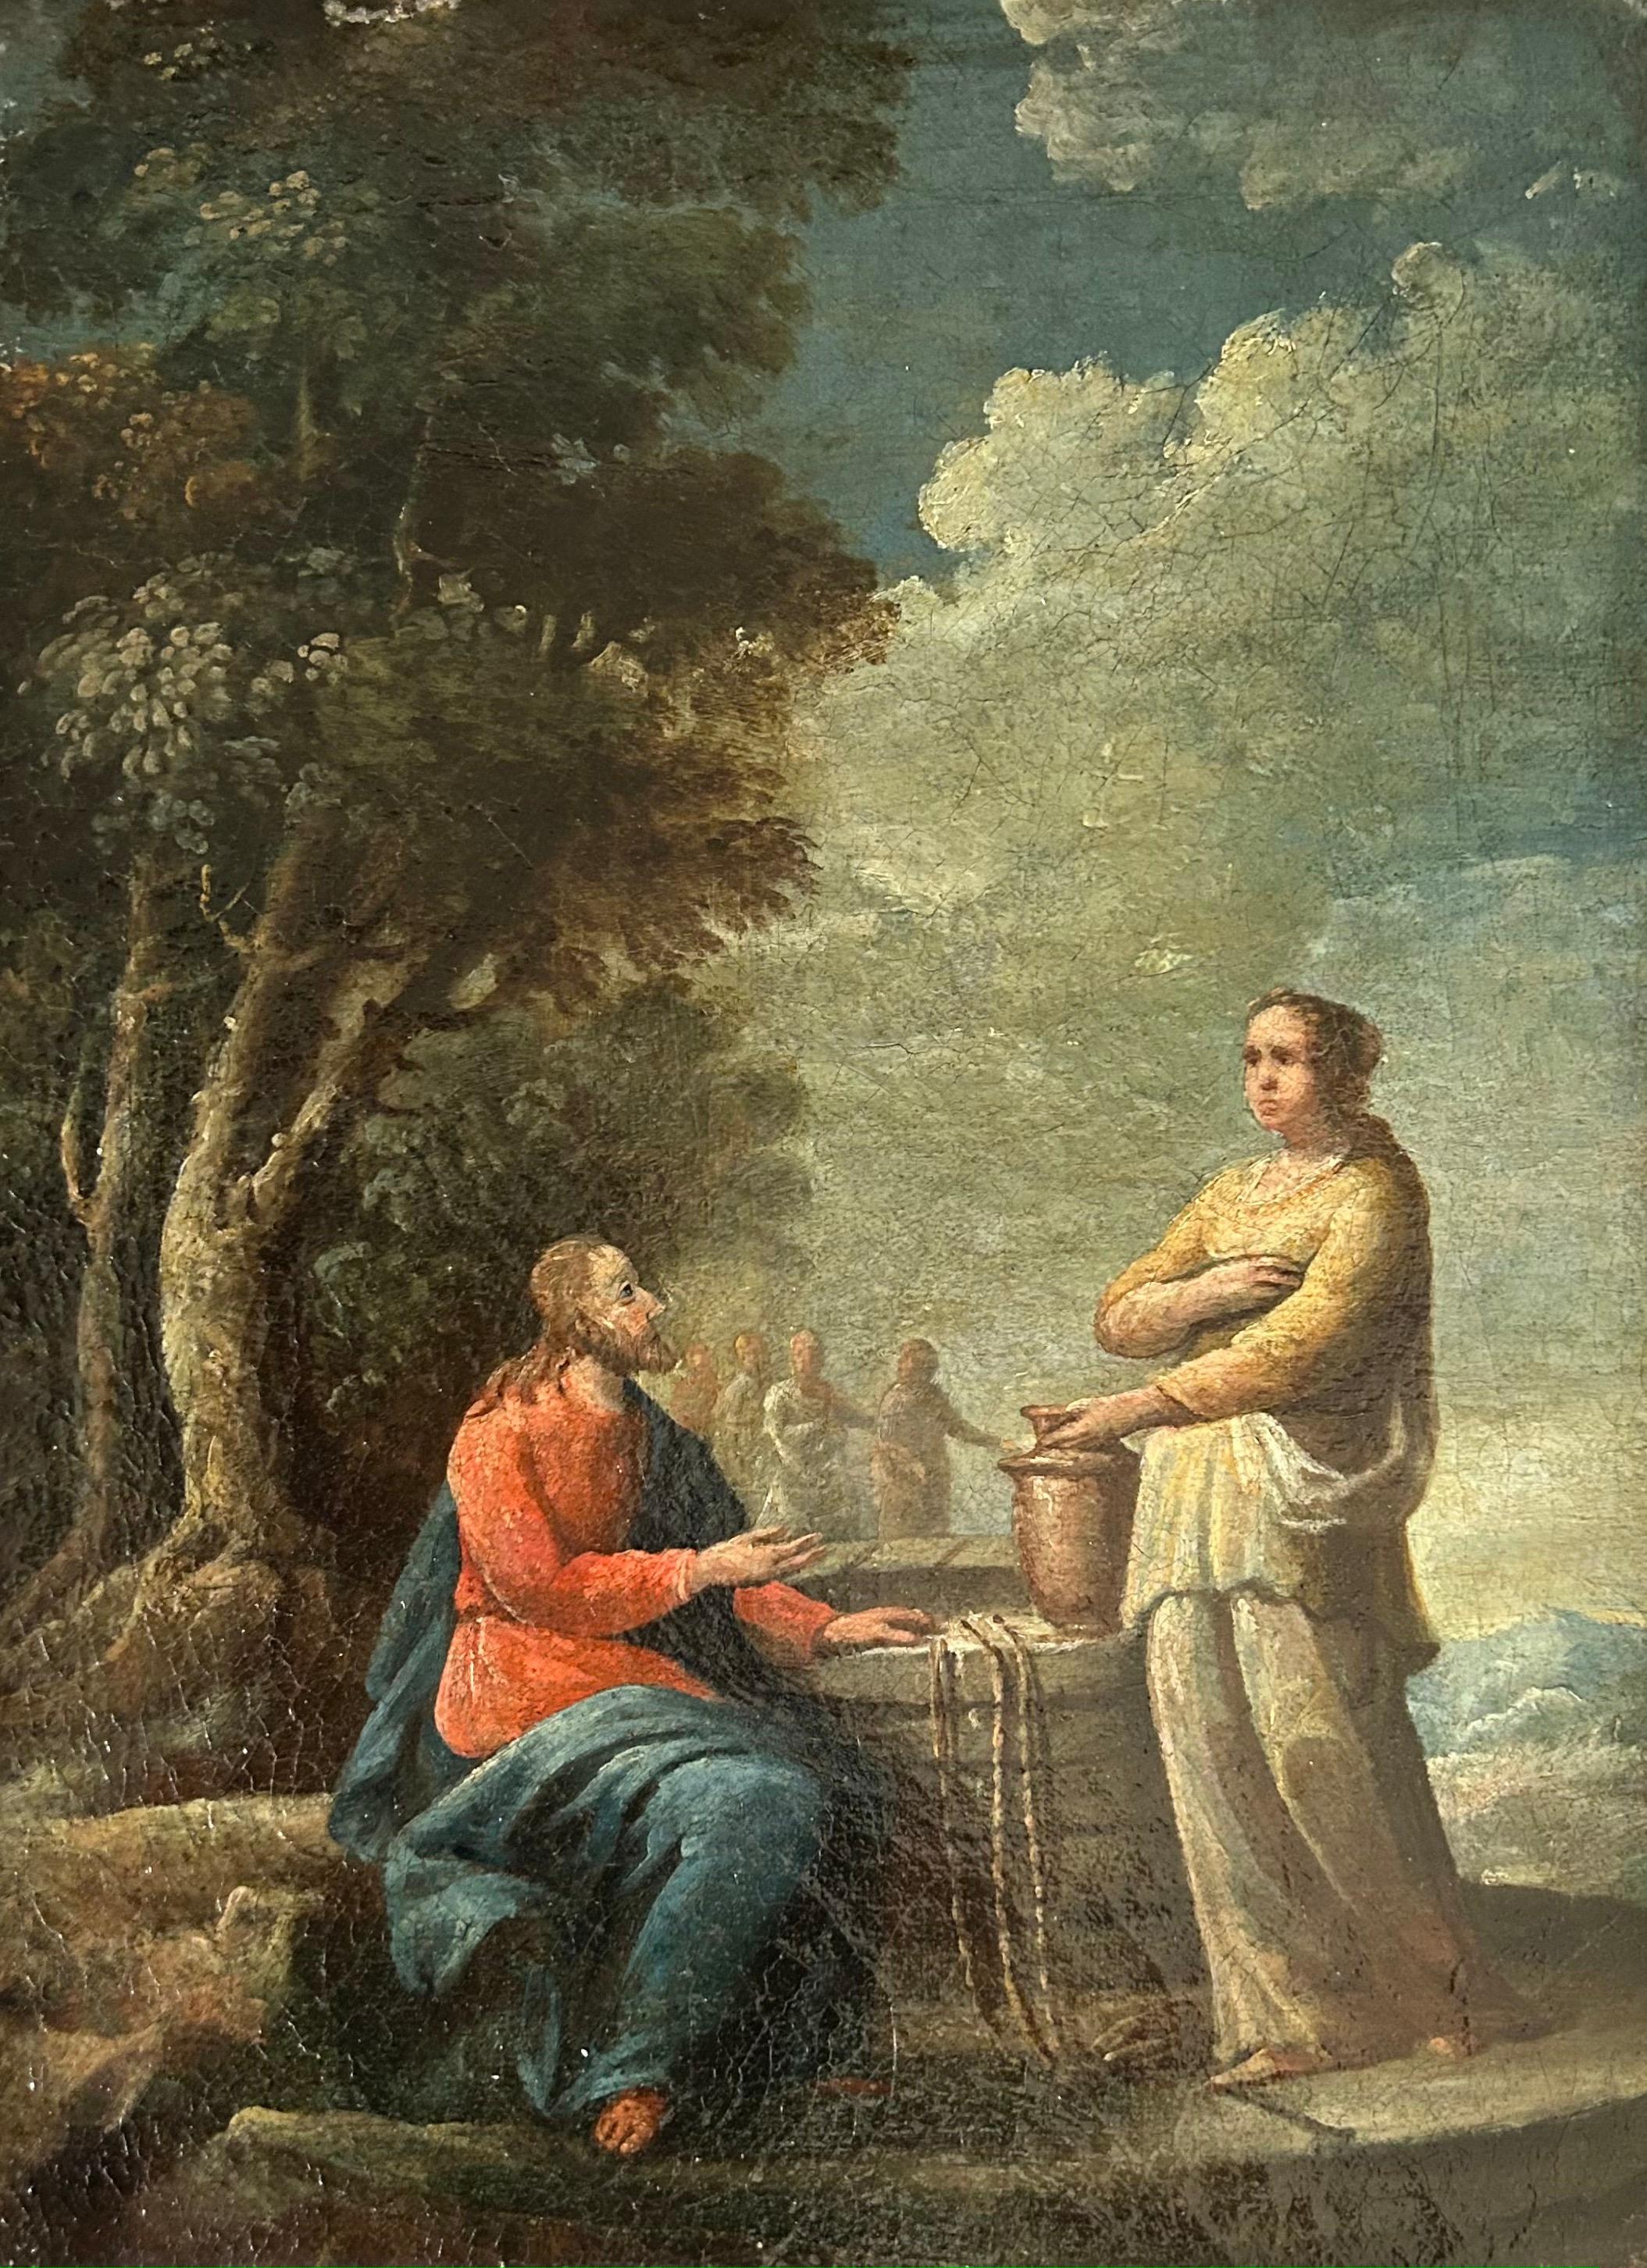 Giovanni Serodine Figurative Painting - "Jesus and the Samaritan woman at Jacob's well", oil on canvas from early 17th c